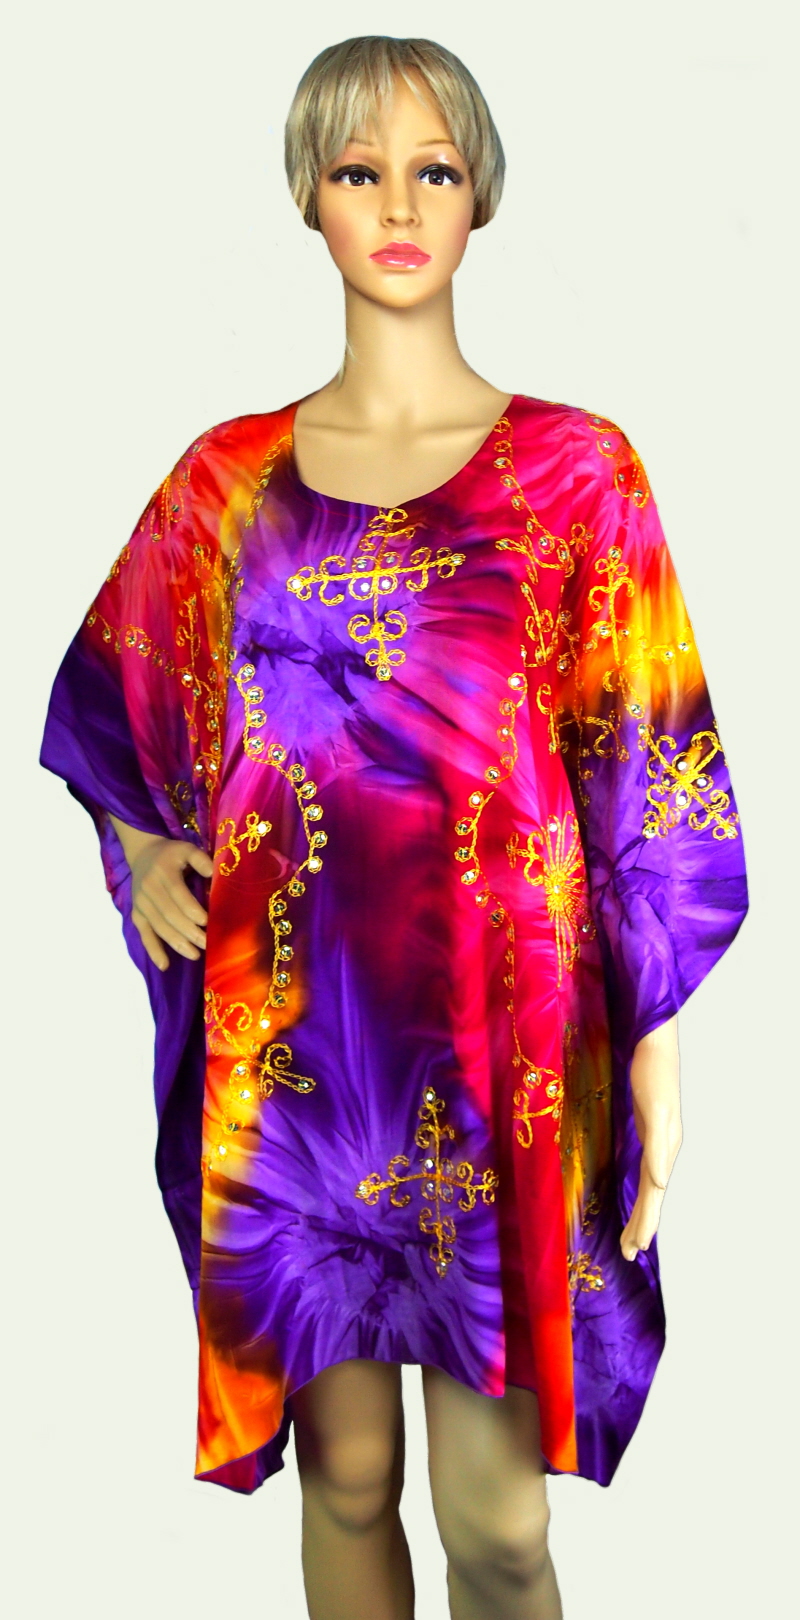 SarongsEtc.com - Embroidered Tie-Dye Poncho Top with Sequins